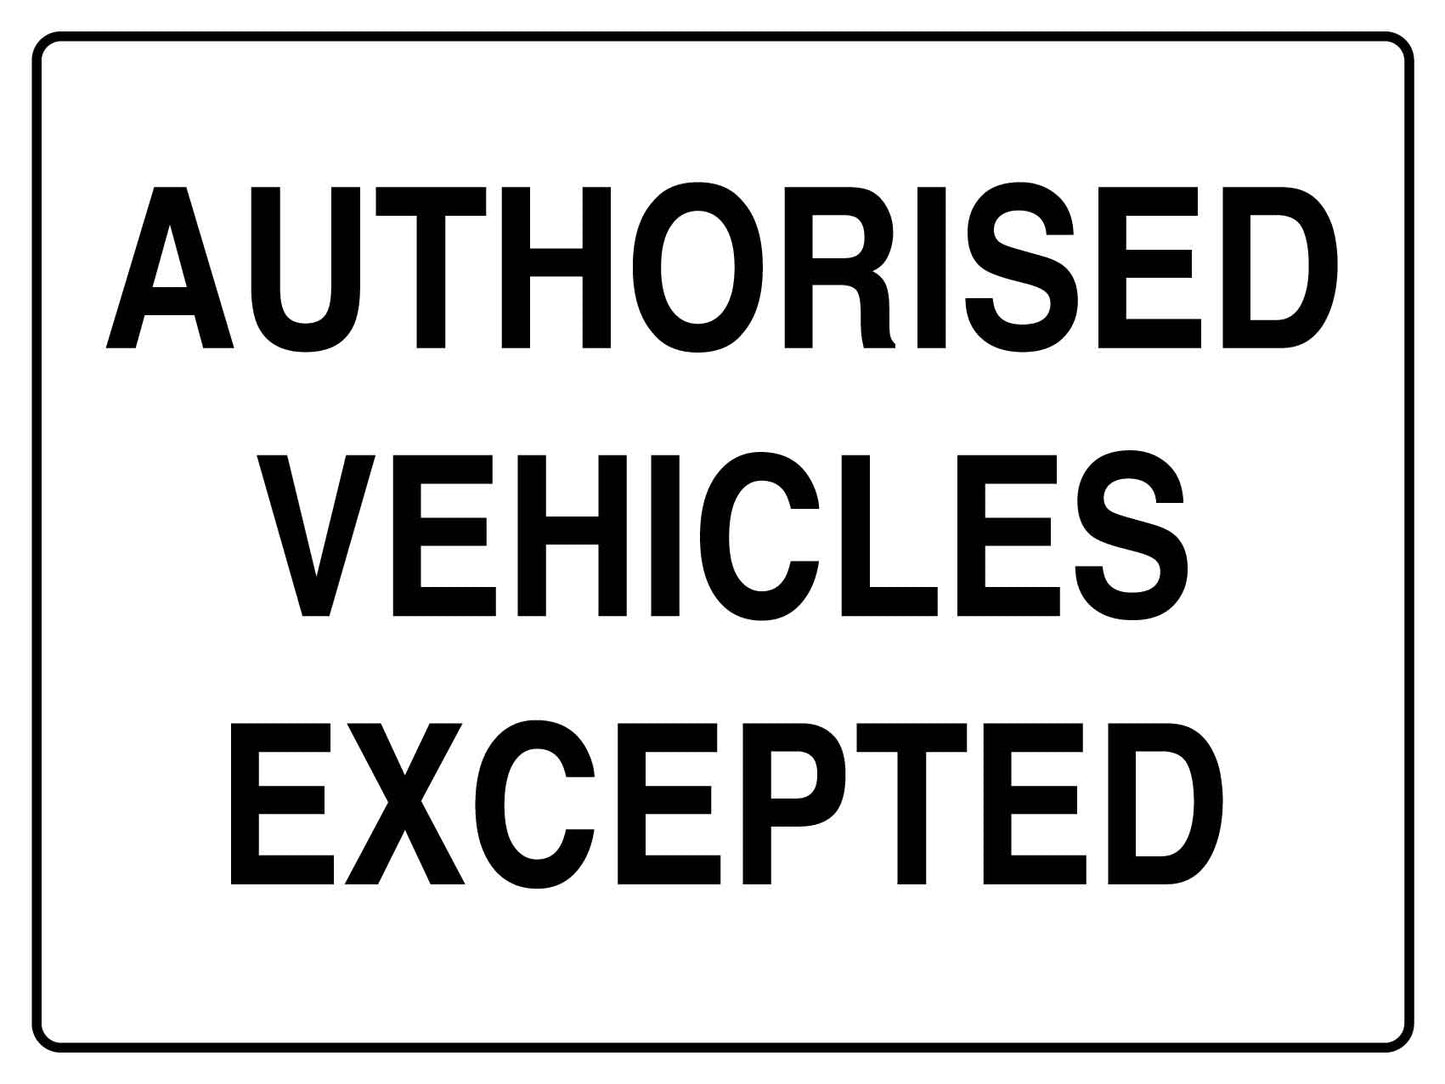 Authorised Vehicles Excepted Sign